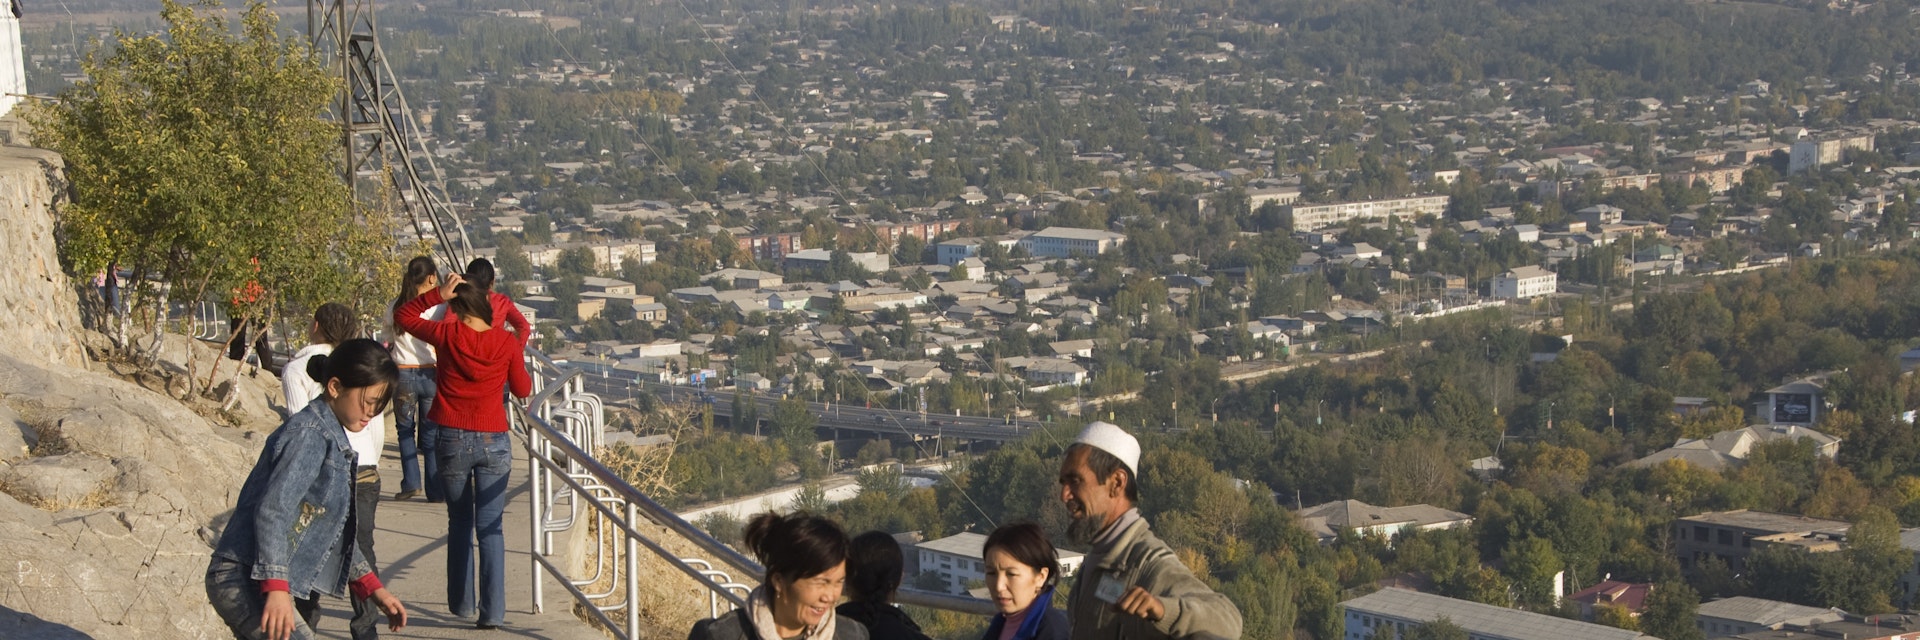 Kyrgyz people enjoying themselves on Solomon's Throne with city overview.